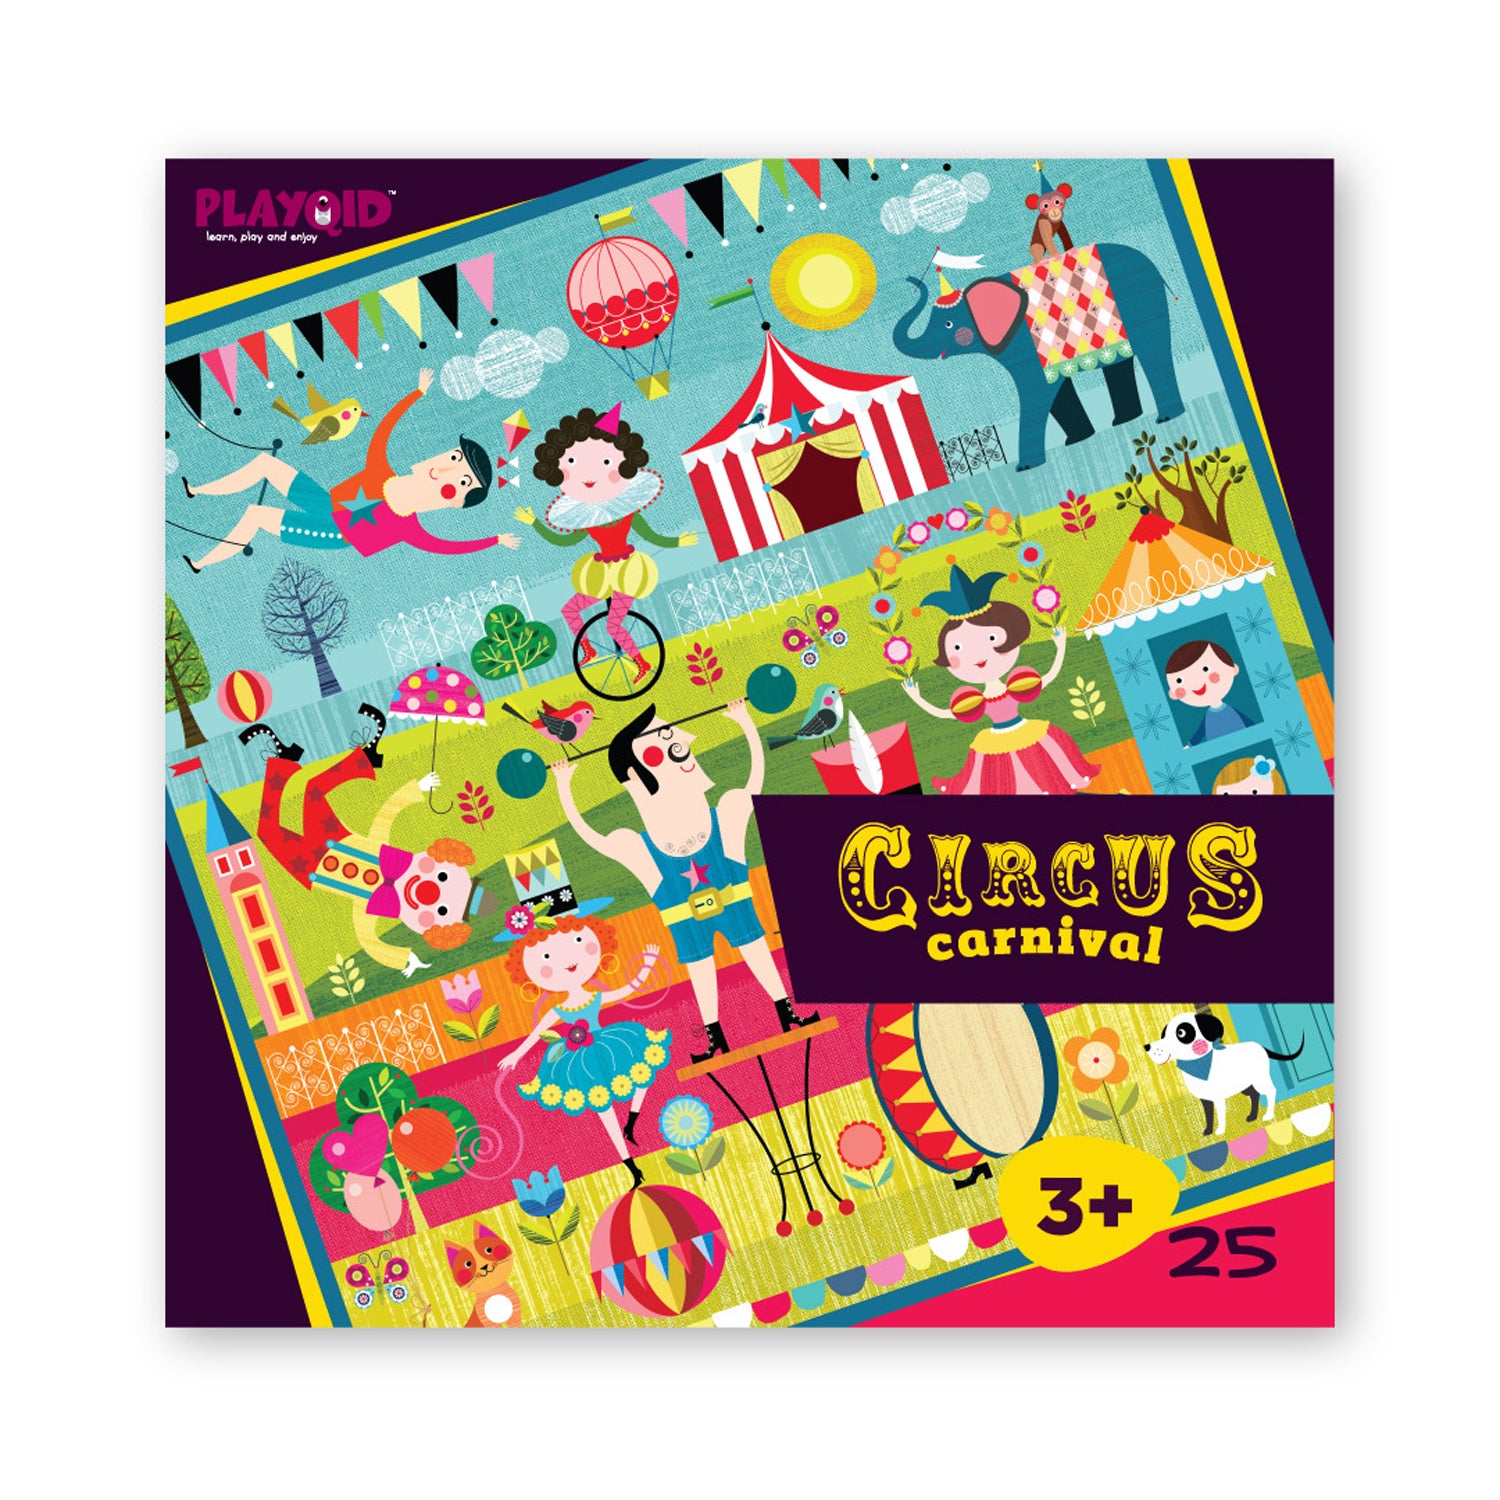 Circus Carnival - 25 Piece Puzzles